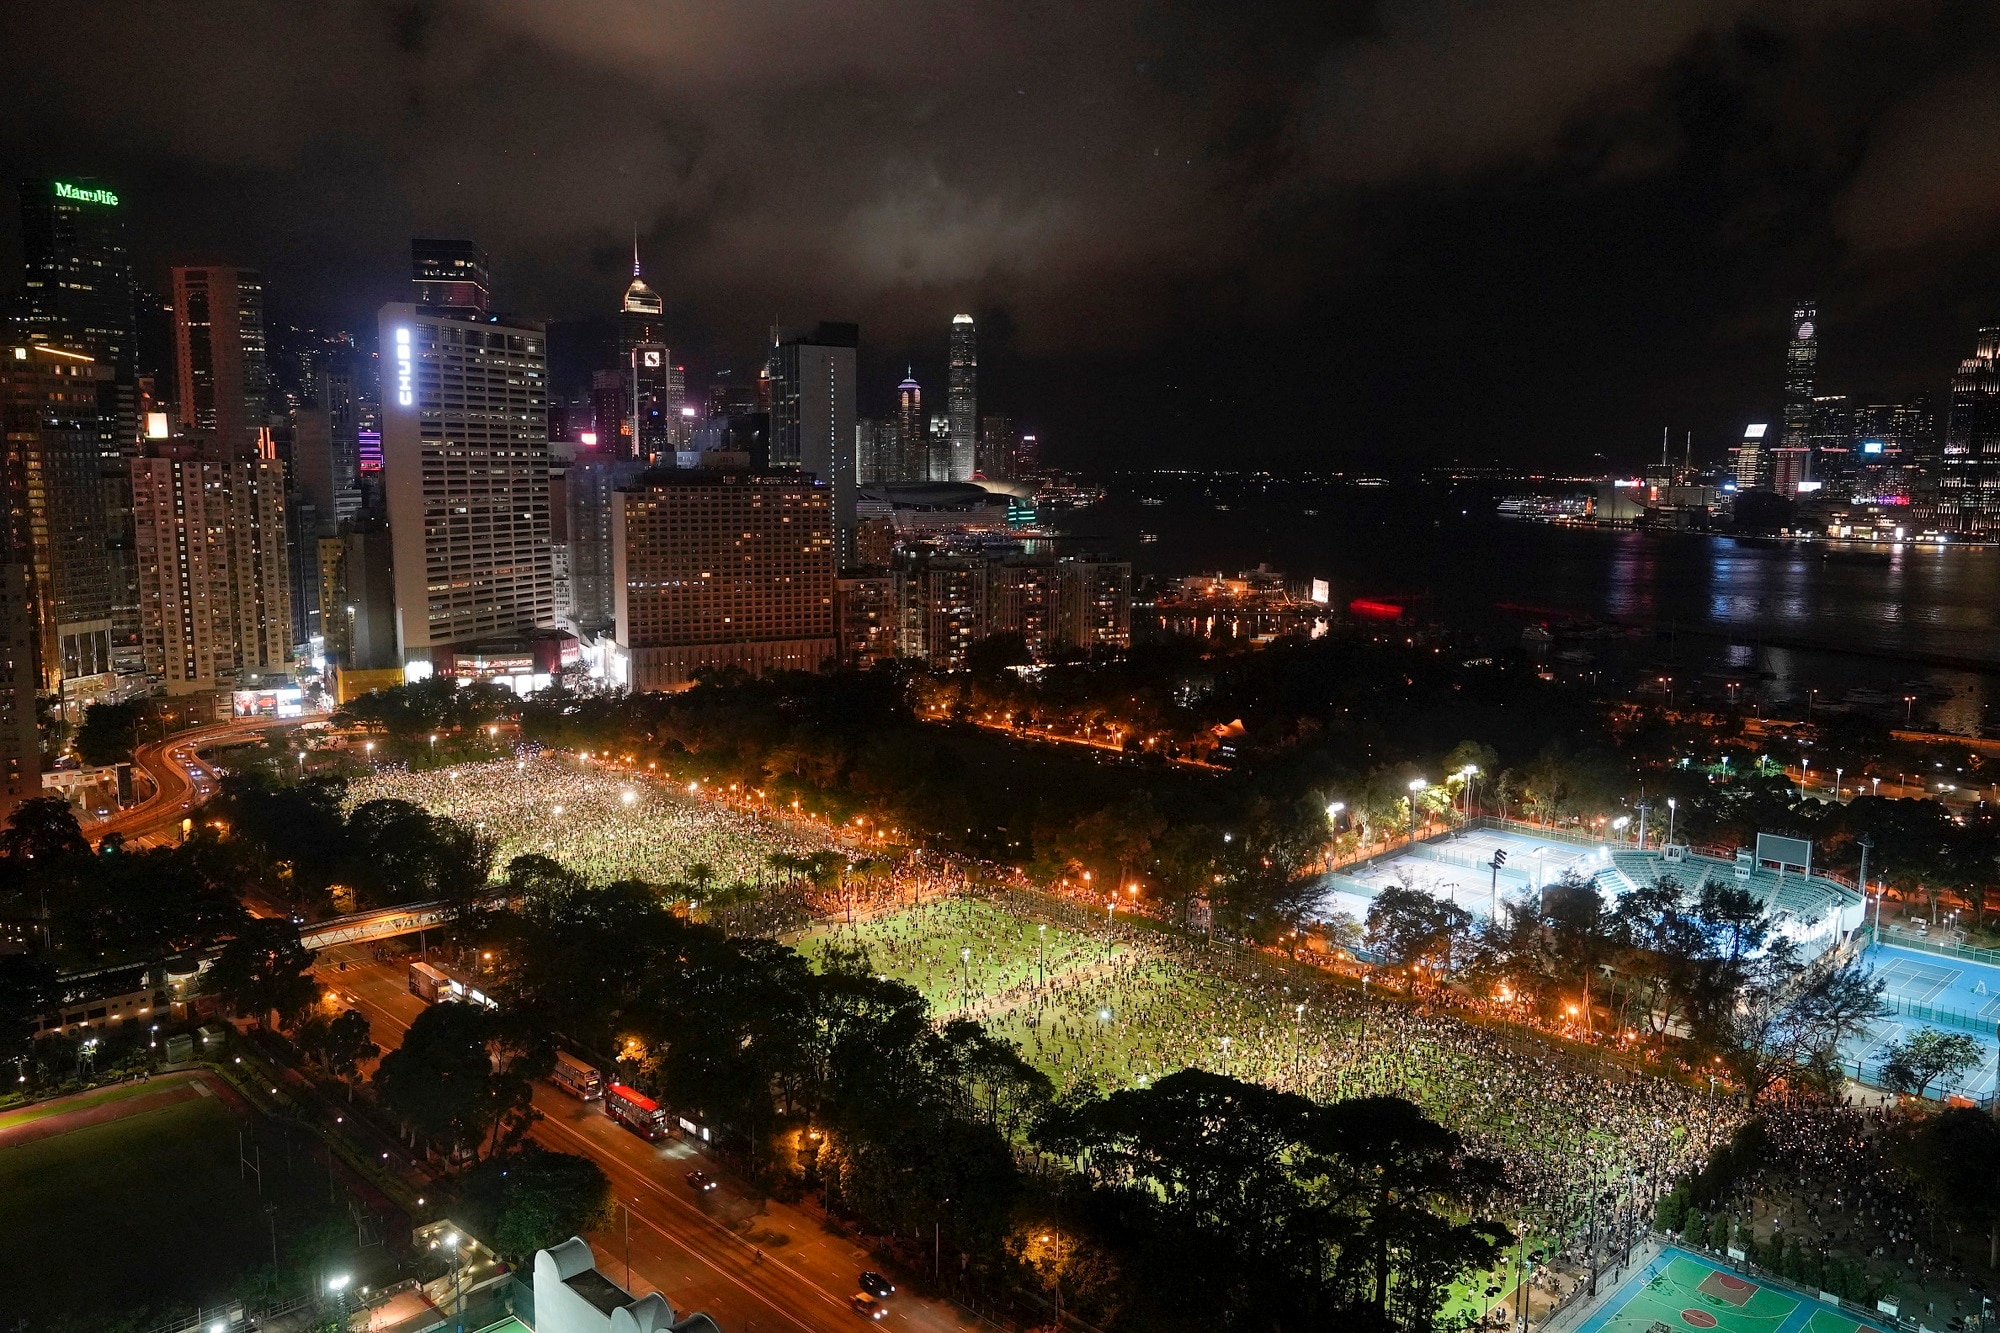 Supporters gather for a vigil for the victims of the 1989 Tiananmen Square Massacre at Victoria Park in Causeway Bay, Hong Kong in 2020.